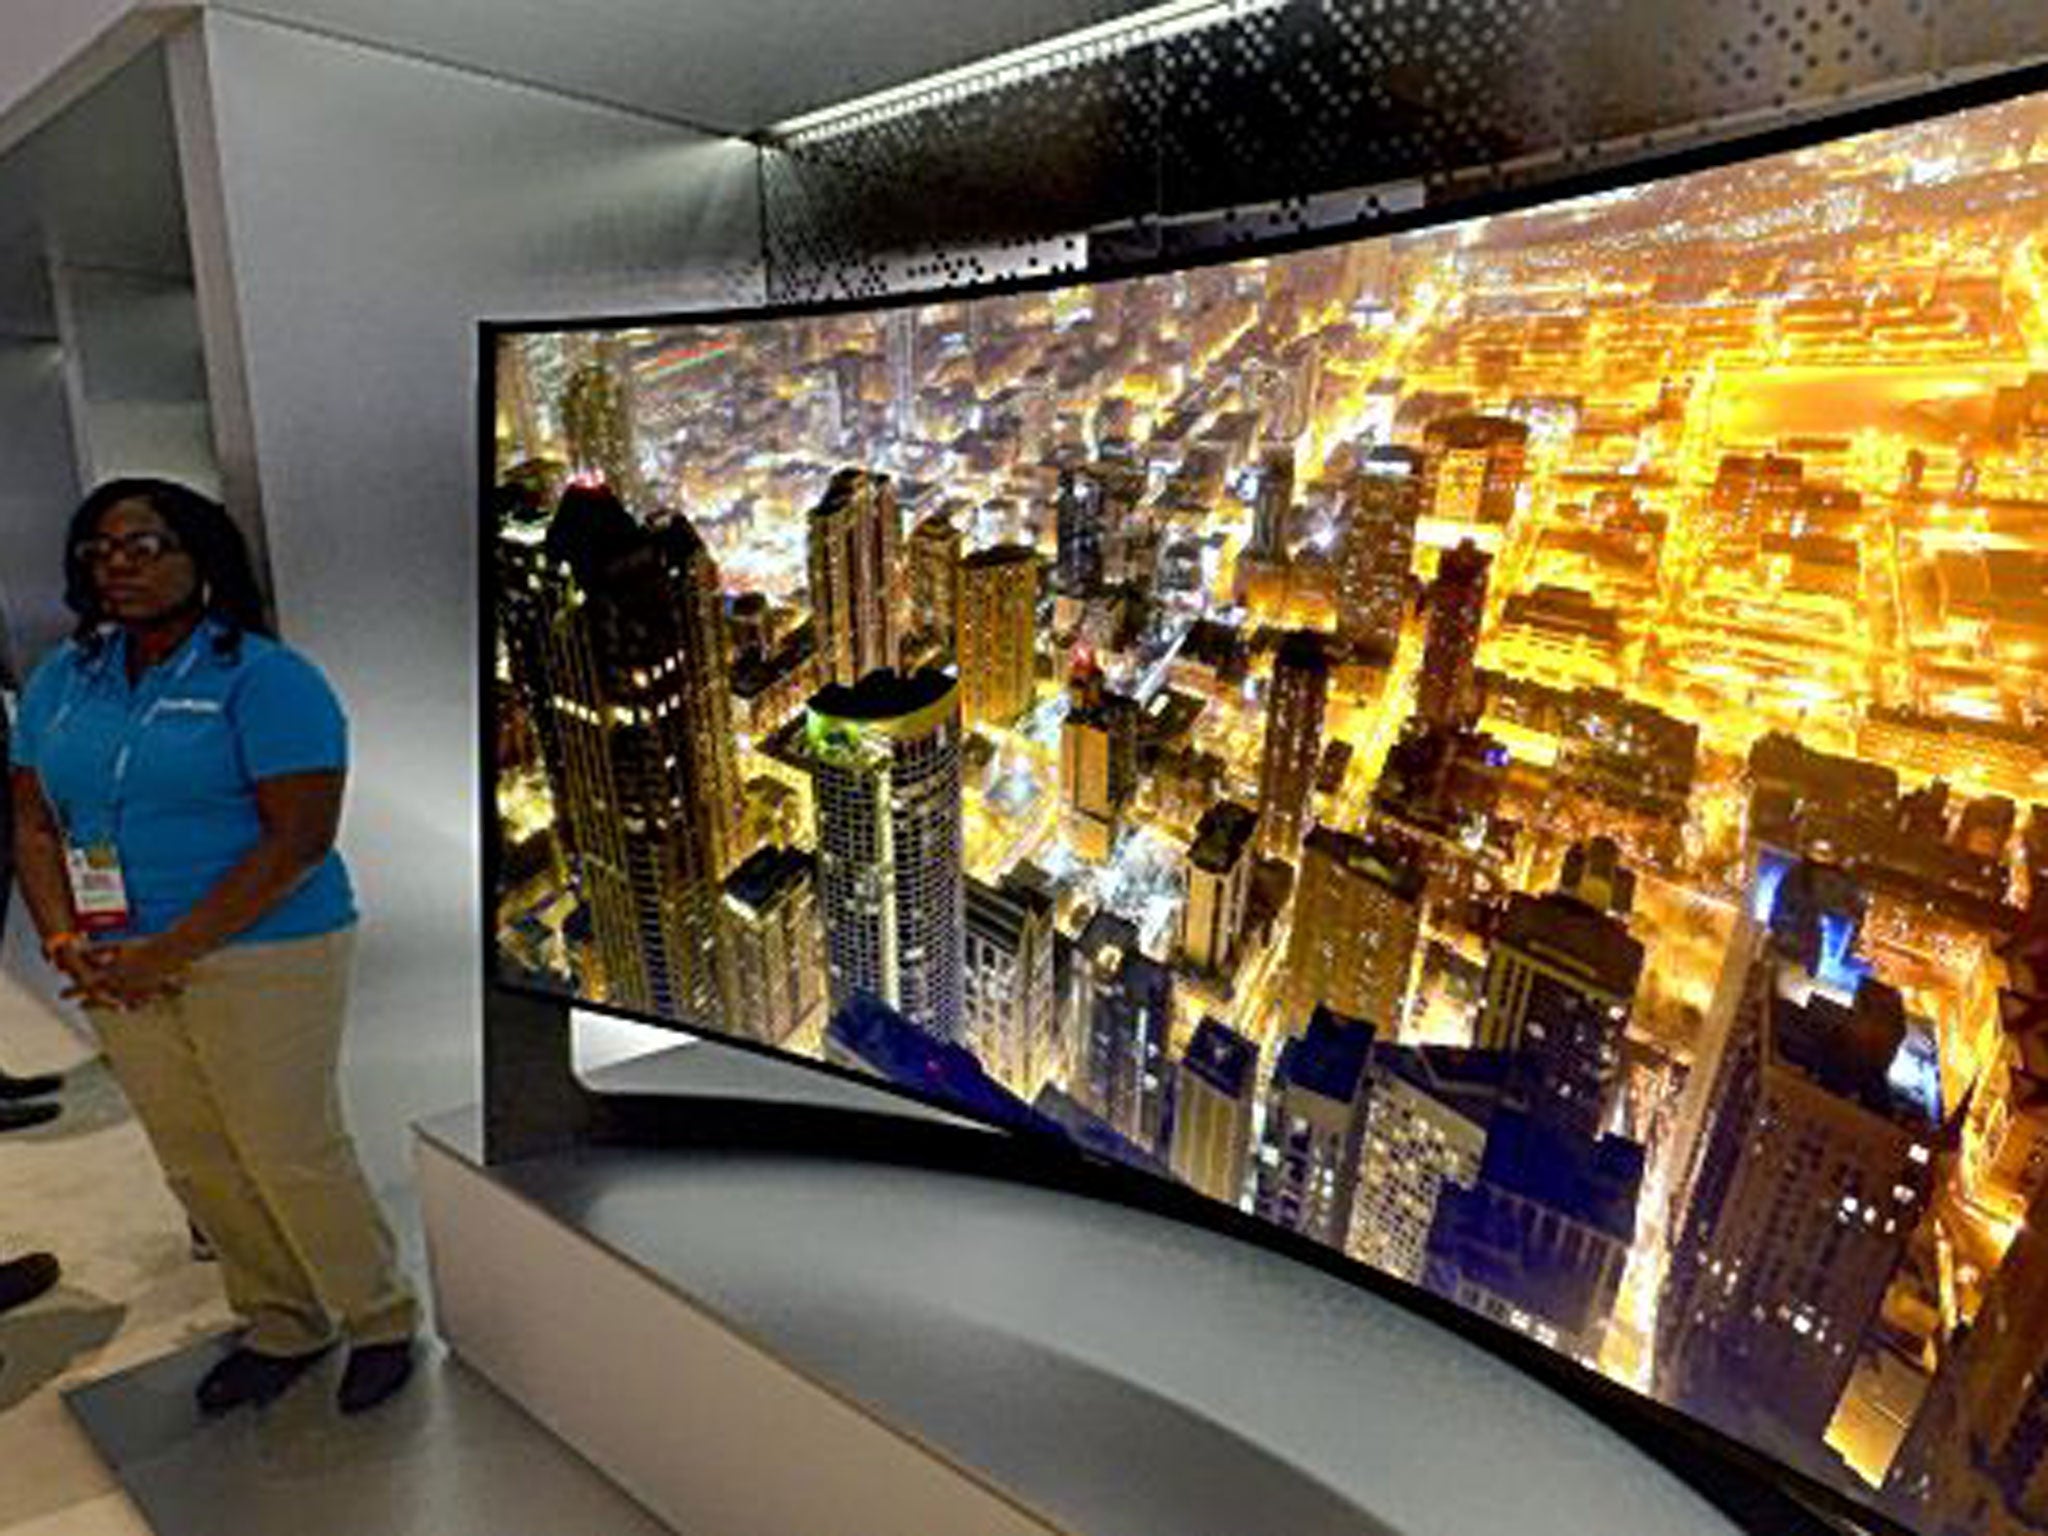 Samsung showed off an 85in television that can be either flat or curved